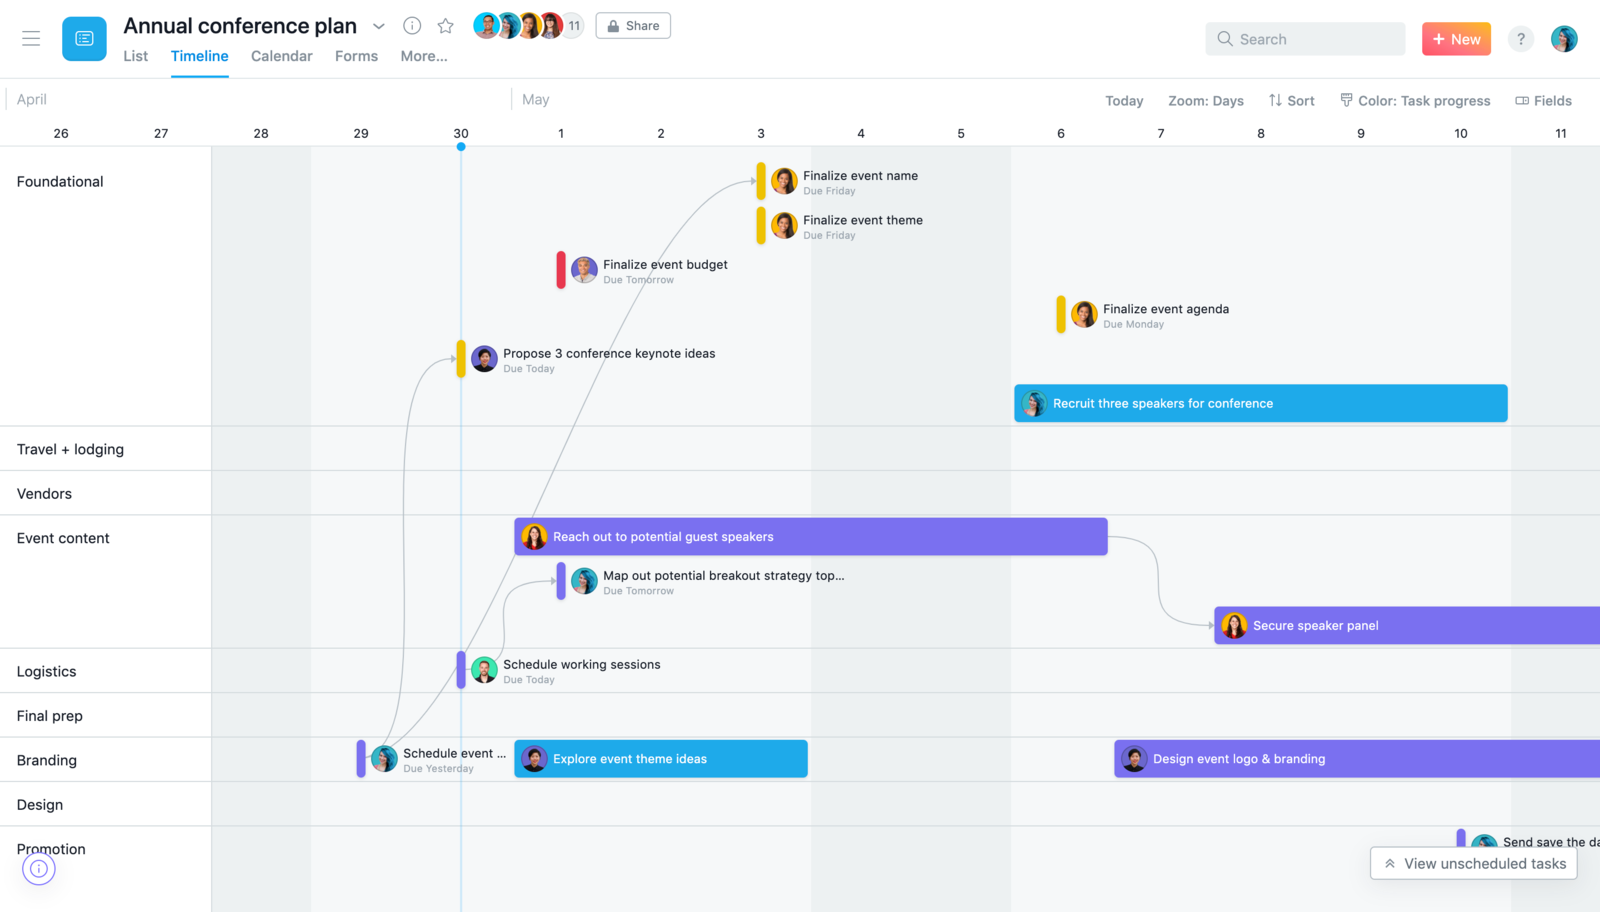 The standard timeline view in Asana